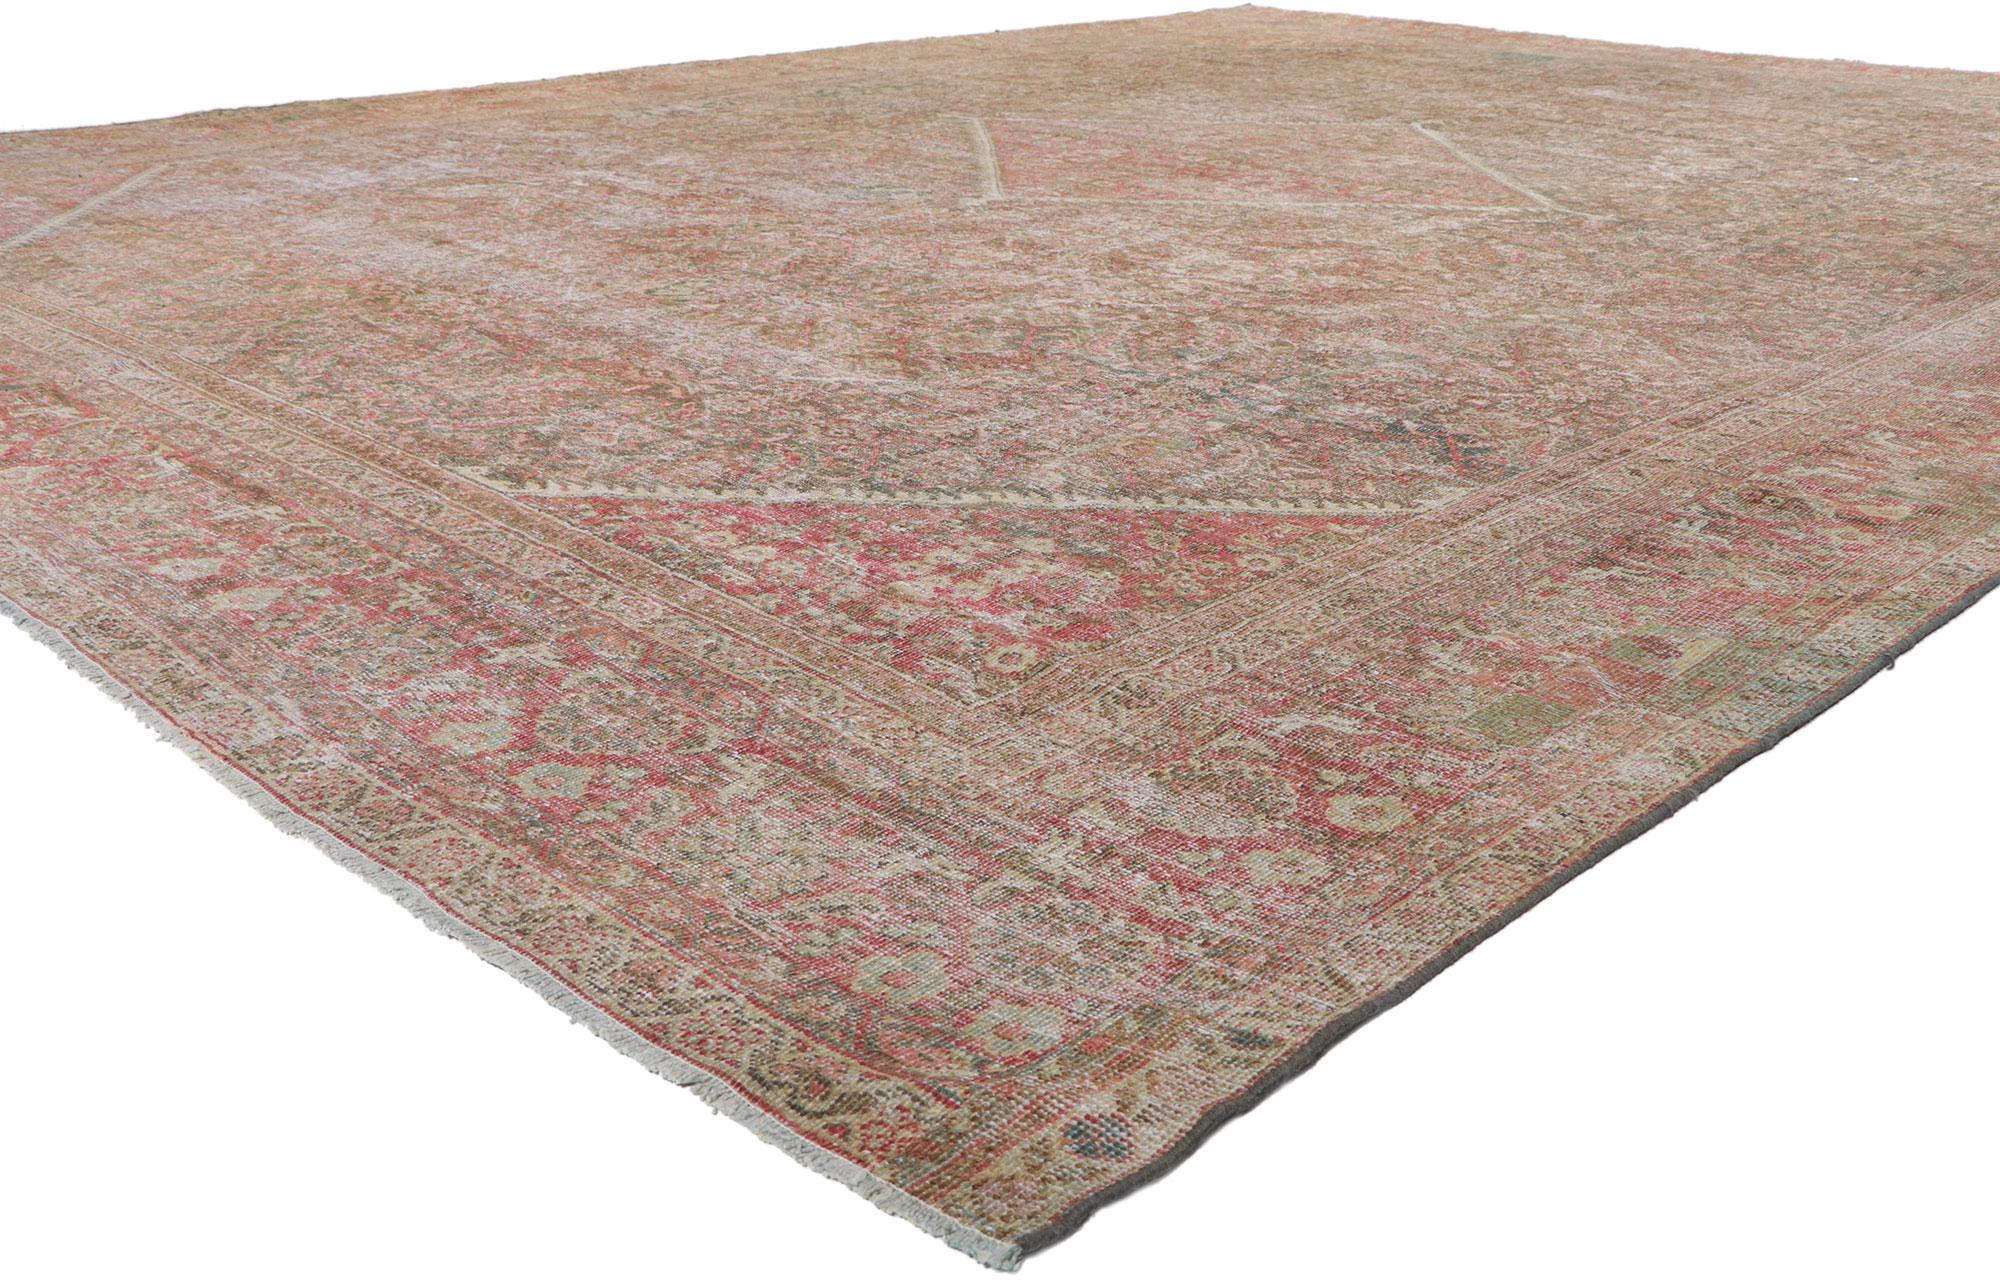 61115 distressed antique Persian Mahal rug, 09'09 x 11'11. With its rugged beauty and rustic sensibility, this hand knotted wool antique Persian Mahal rug creates an inimitable warmth and calming ambiance. The barely-there Herati design and earthy